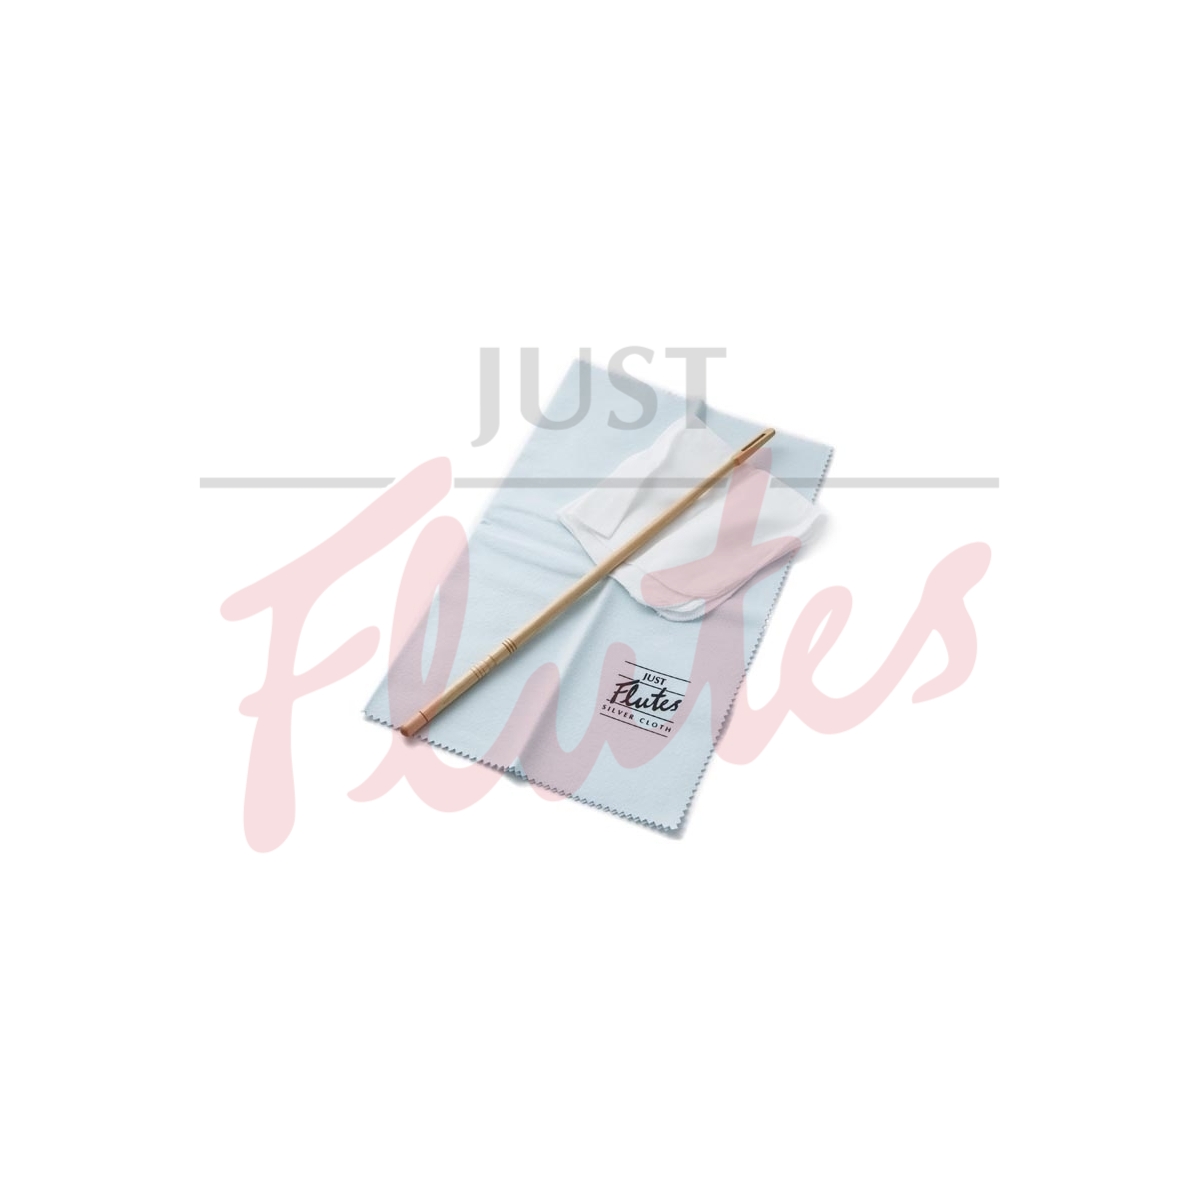 Just Flutes Flute Cleaning Kit